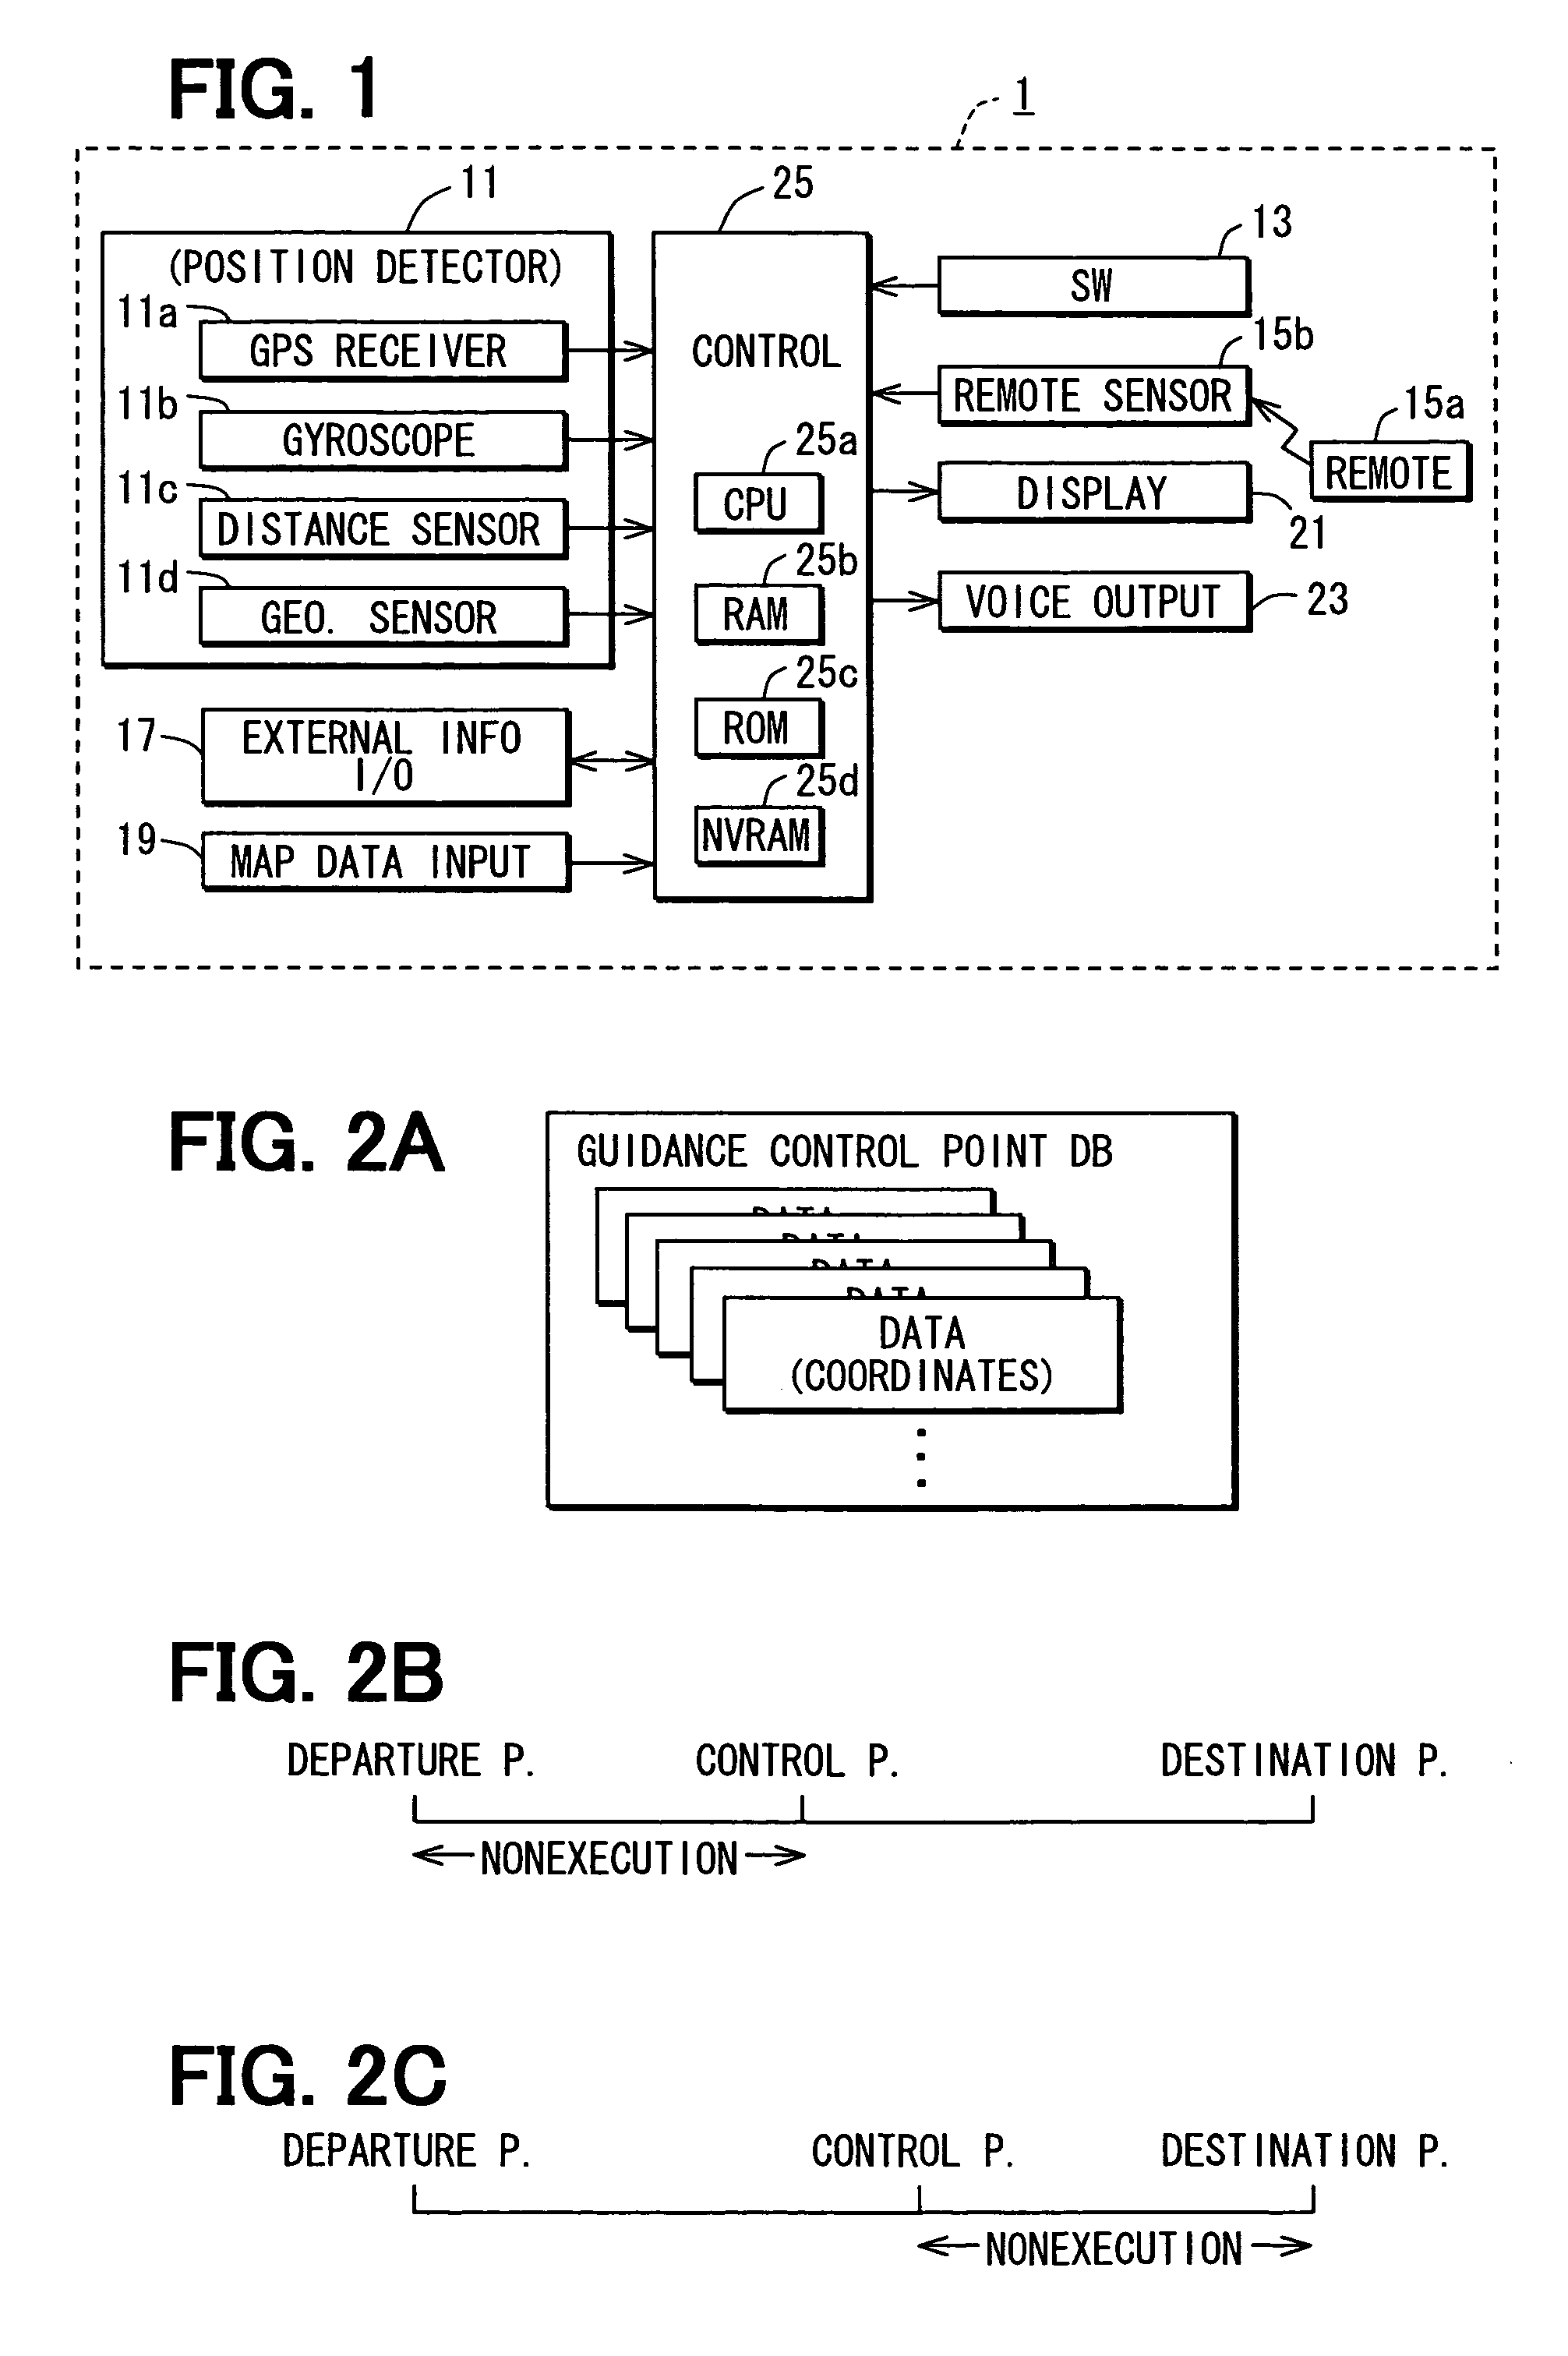 Routing assistance system